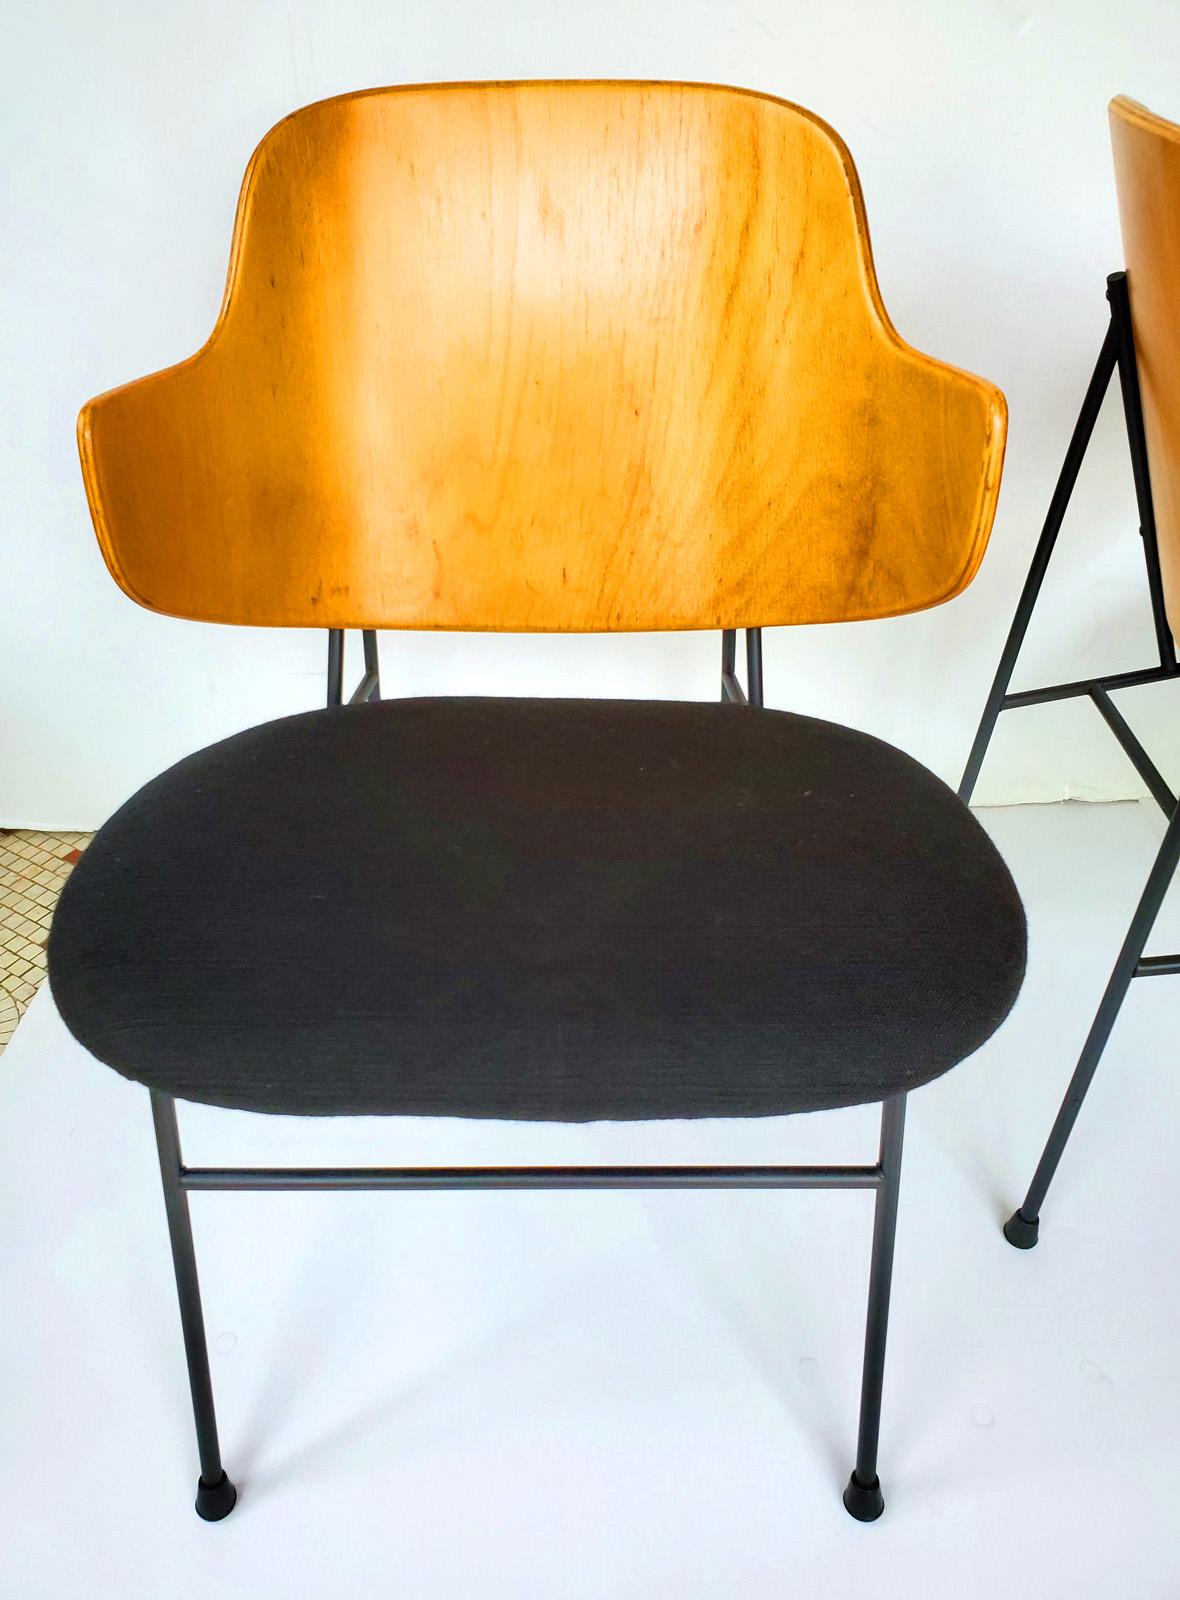 Vintage pair of Classic Mid-Century Modern lounge chairs designed by
Ib Kofod -Larsen, Denmark. These were imported by Selig beginning, 1953.
Features bent plywood backs in birch, retaining nice patina. Seats are newly
upholstered. Iron frames